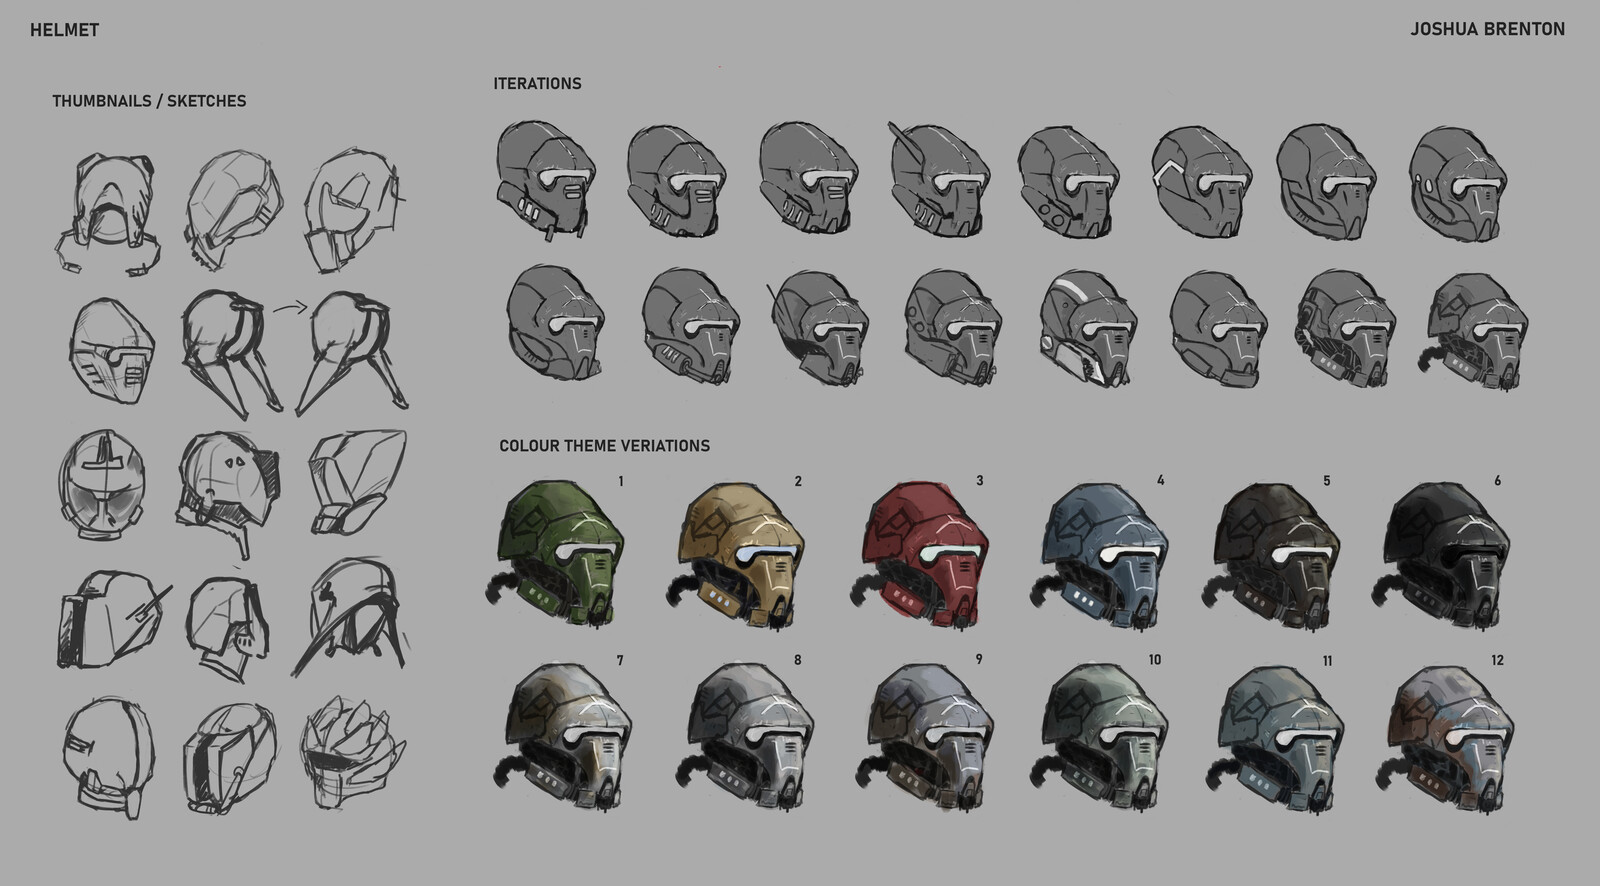 Helmet design first, with thumbnails, then iterations and colour scheme variants
